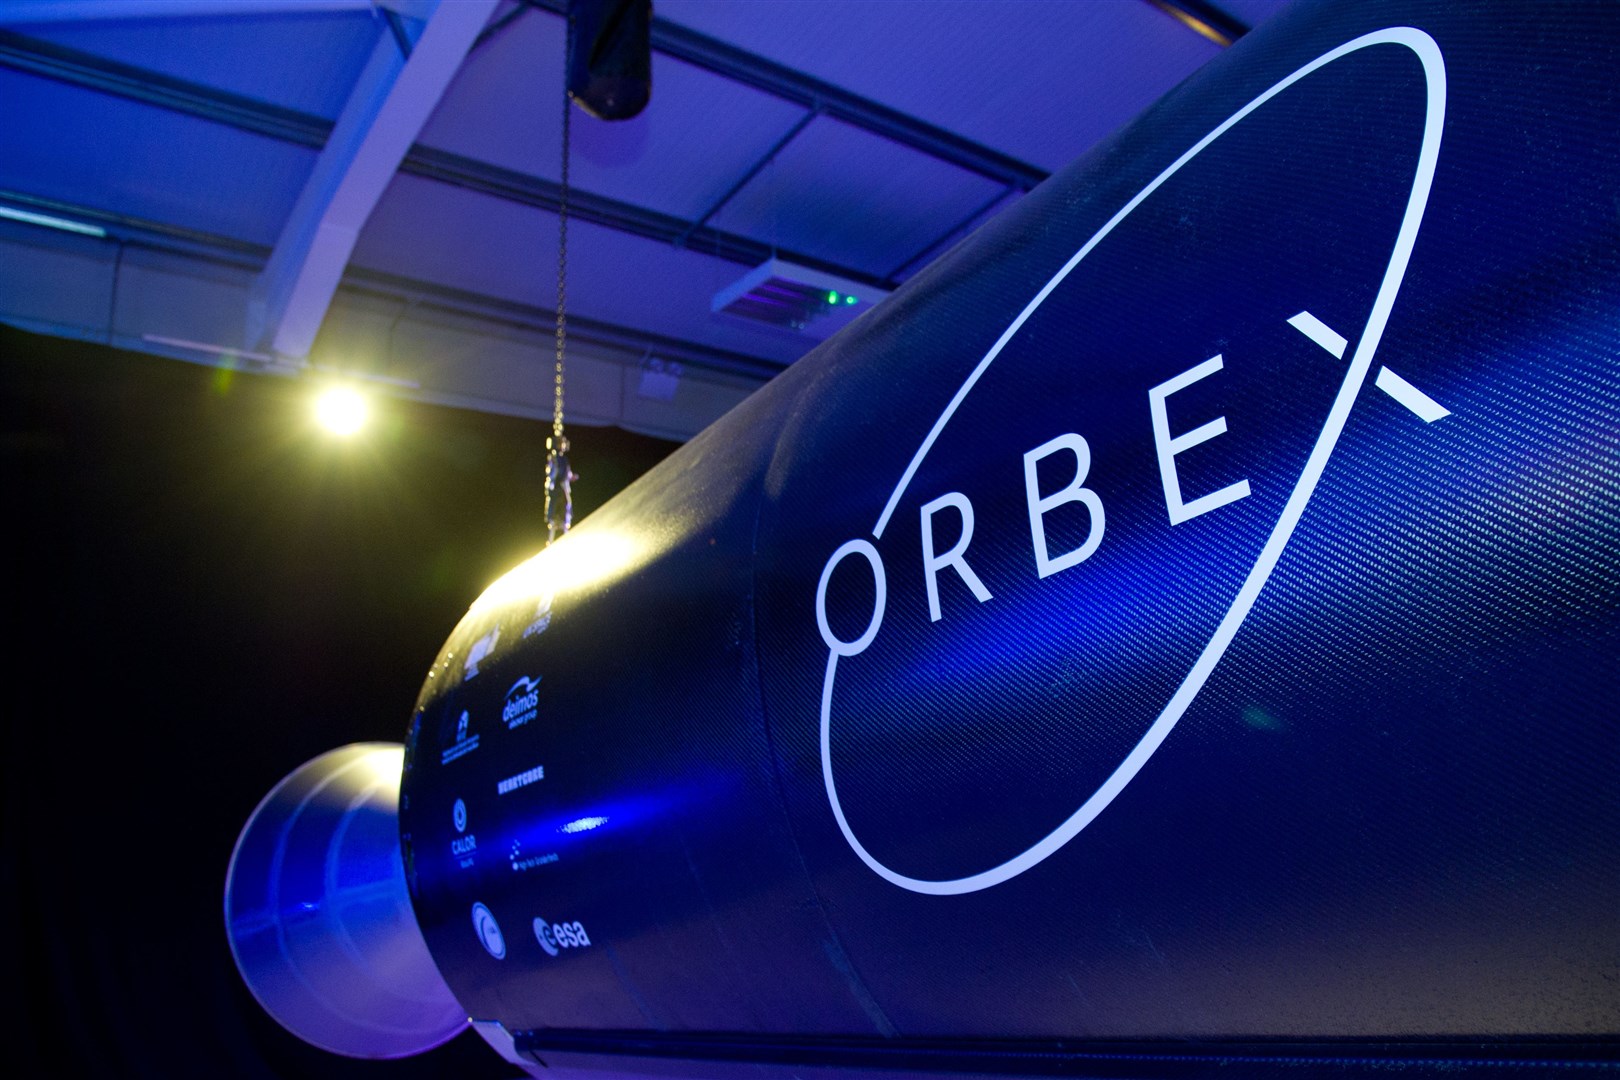 The Prime rocket from Orbex, has an engine which was 3D printed at Forres Enterprise Park. Picture: Daniel Forsyth.